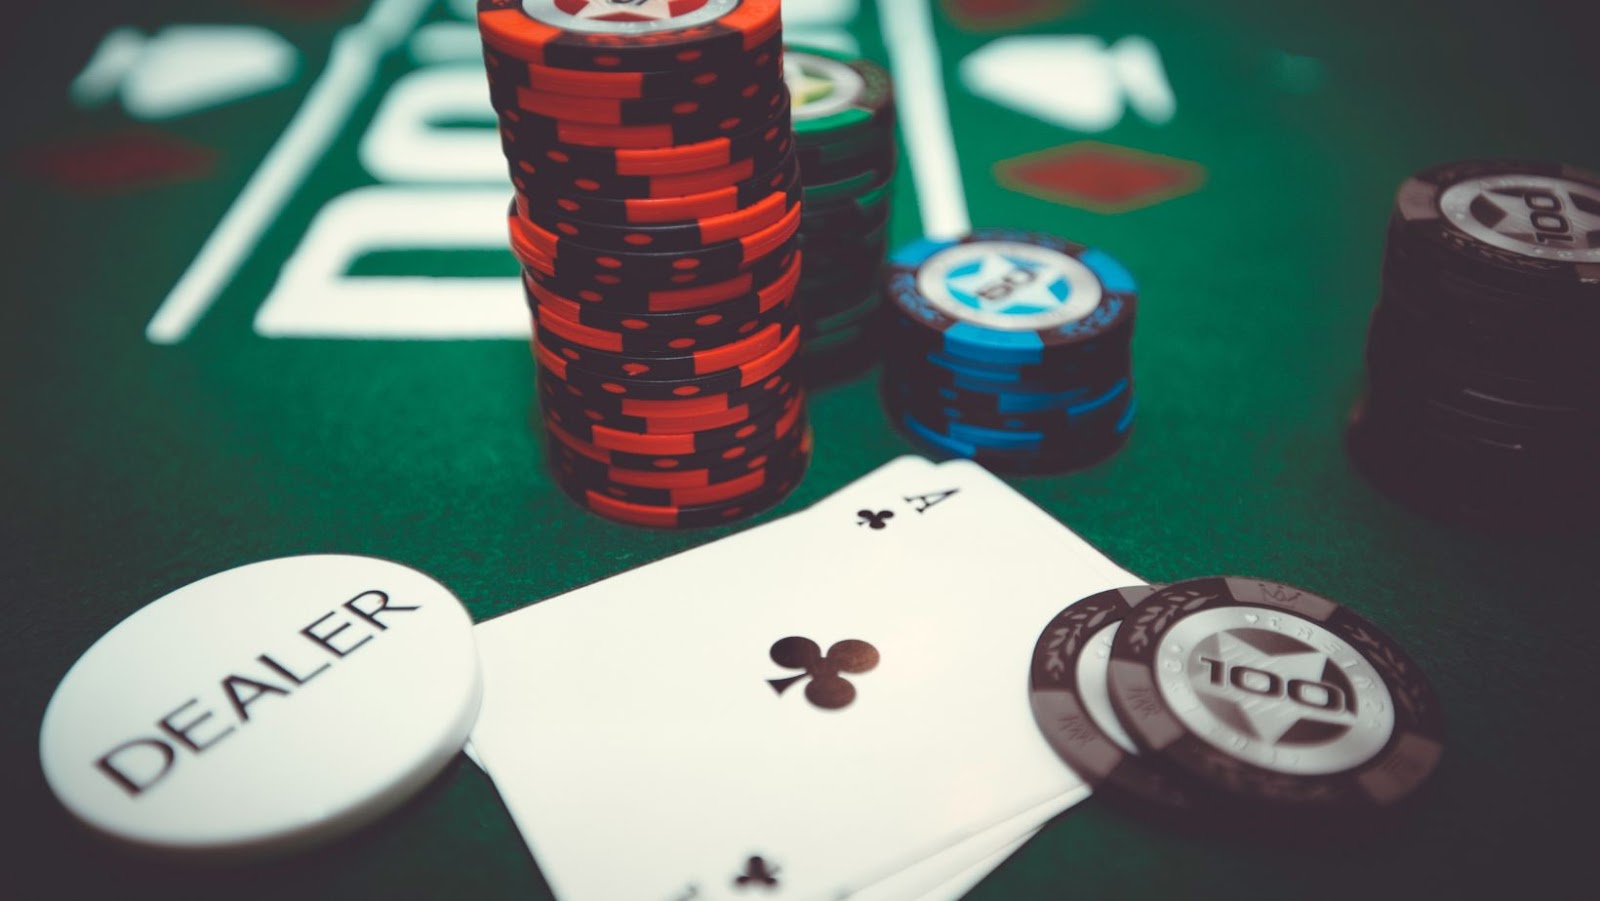 Tips to Win More in Online Casino Games